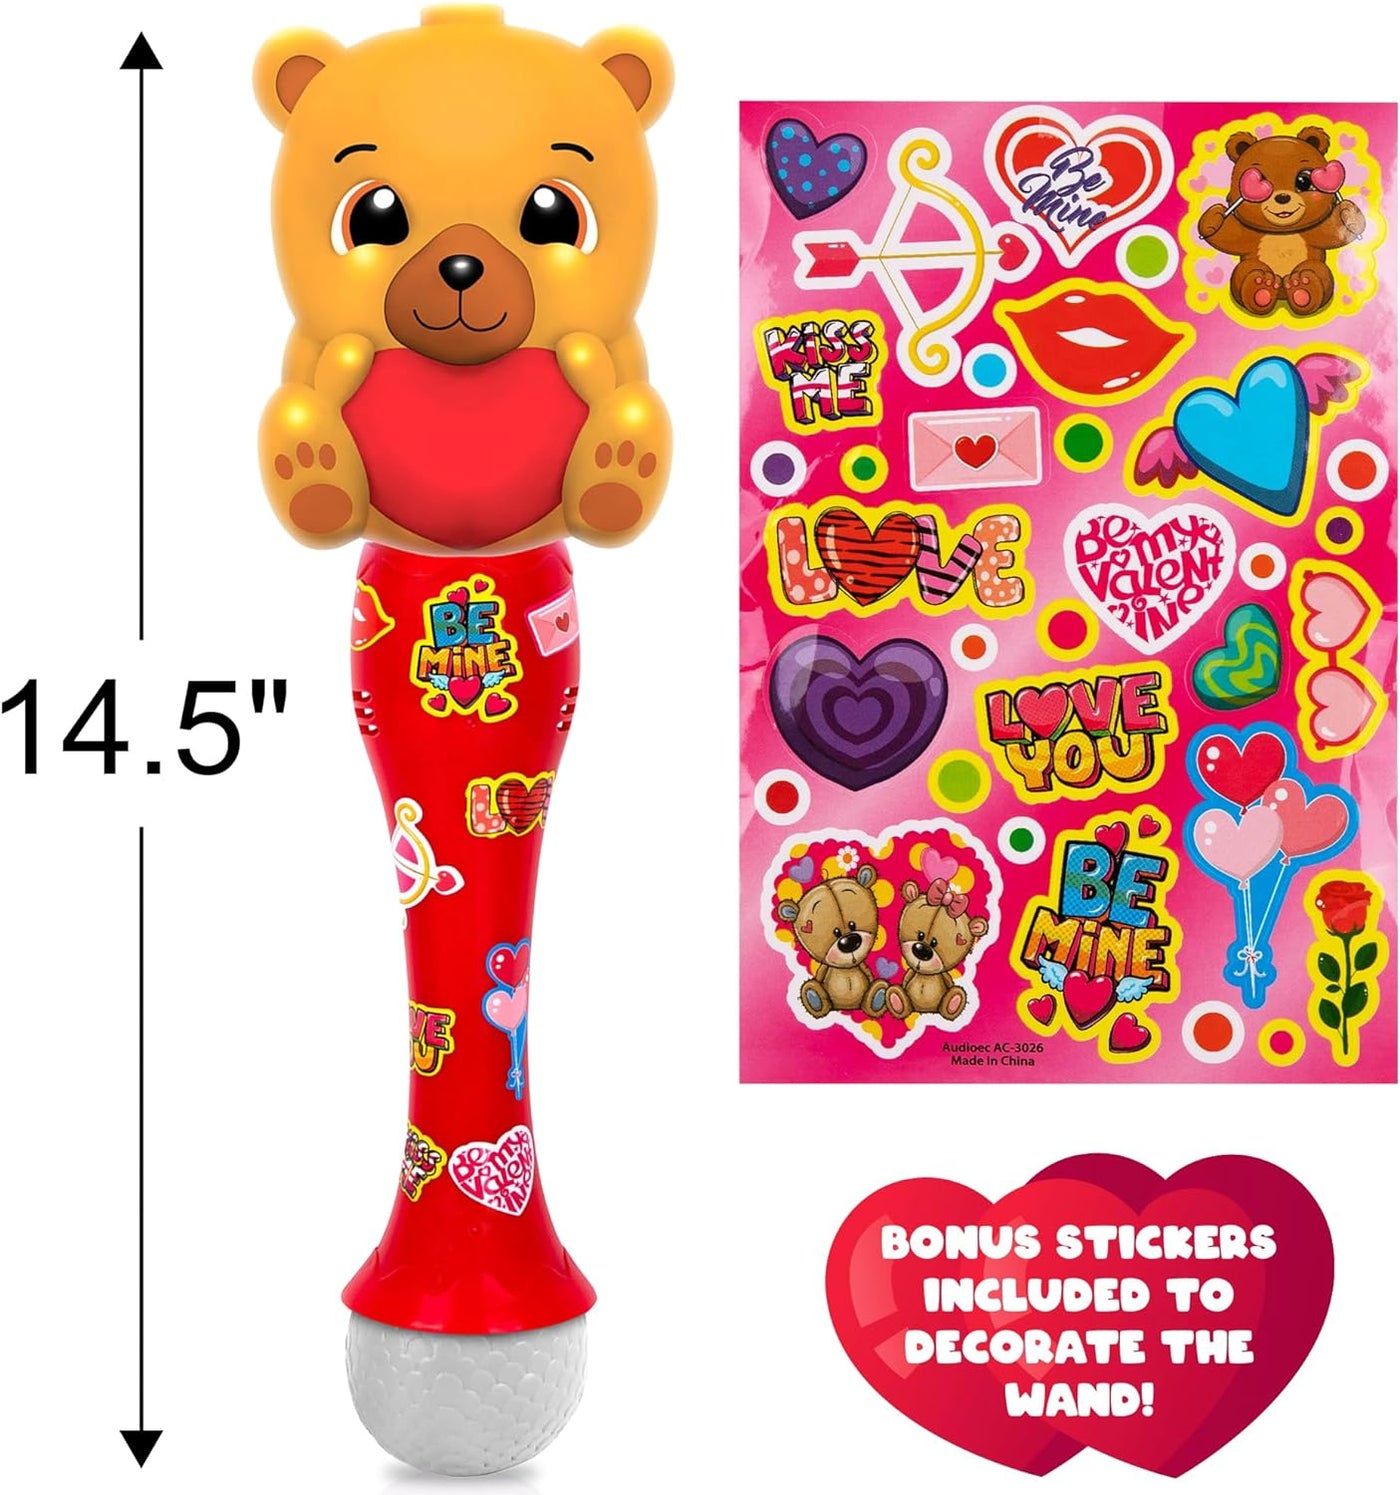 ArtCreativity Light Up Valentine's Day Bubble Wand for Toddlers, Heart Bubble Toy with Lights, Music, & Batteries